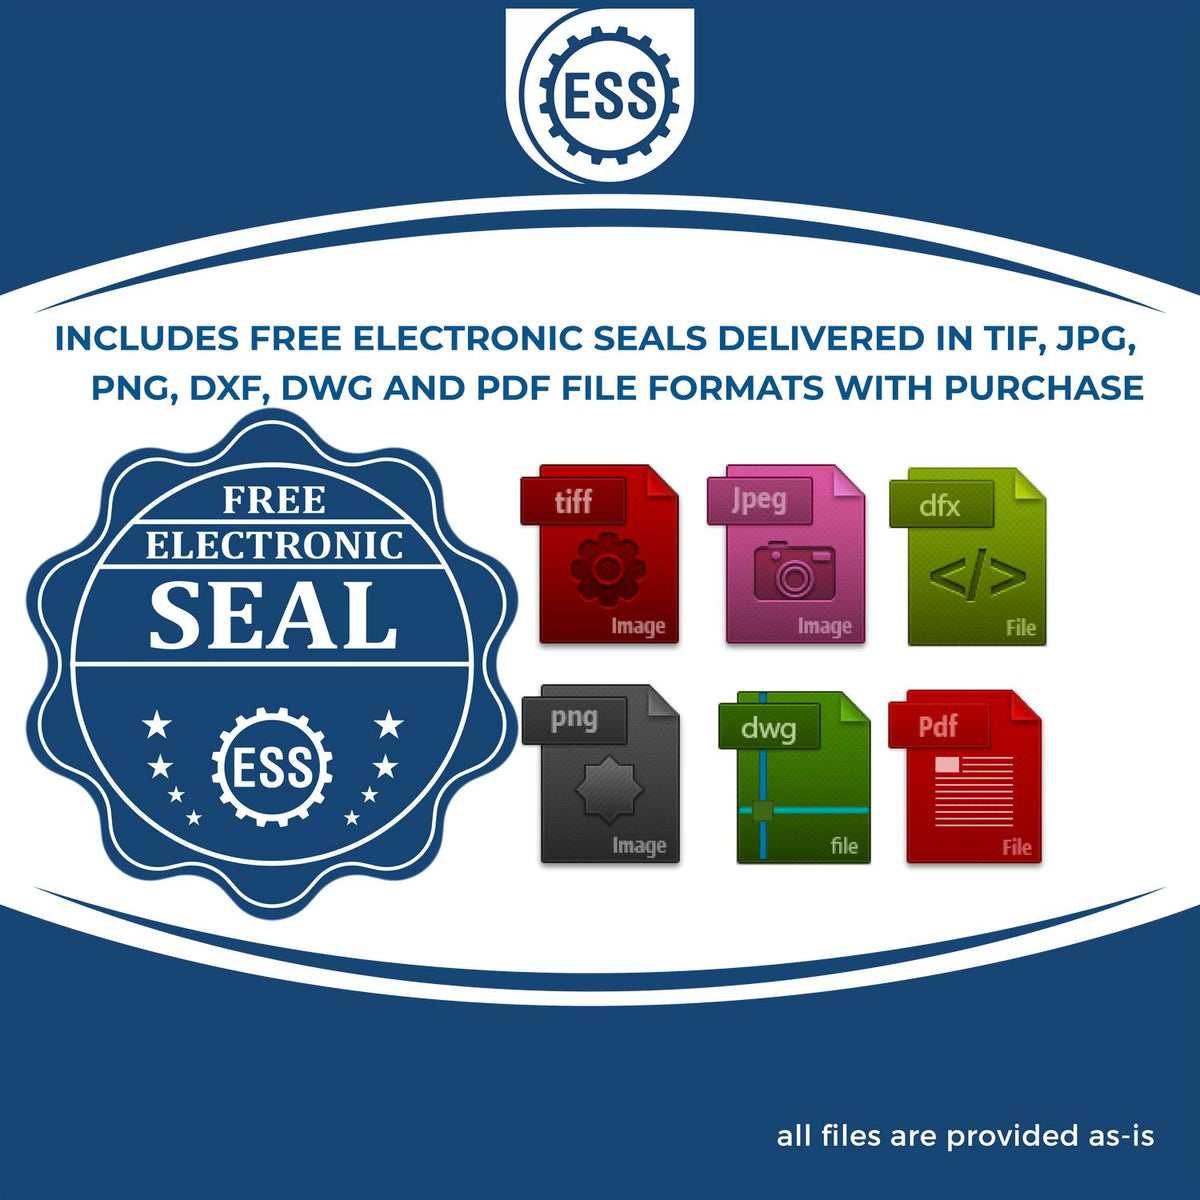 An infographic for the free electronic seal for the Slim Pre-Inked Mississippi Landscape Architect Seal Stamp illustrating the different file type icons such as DXF, DWG, TIF, JPG and PNG.